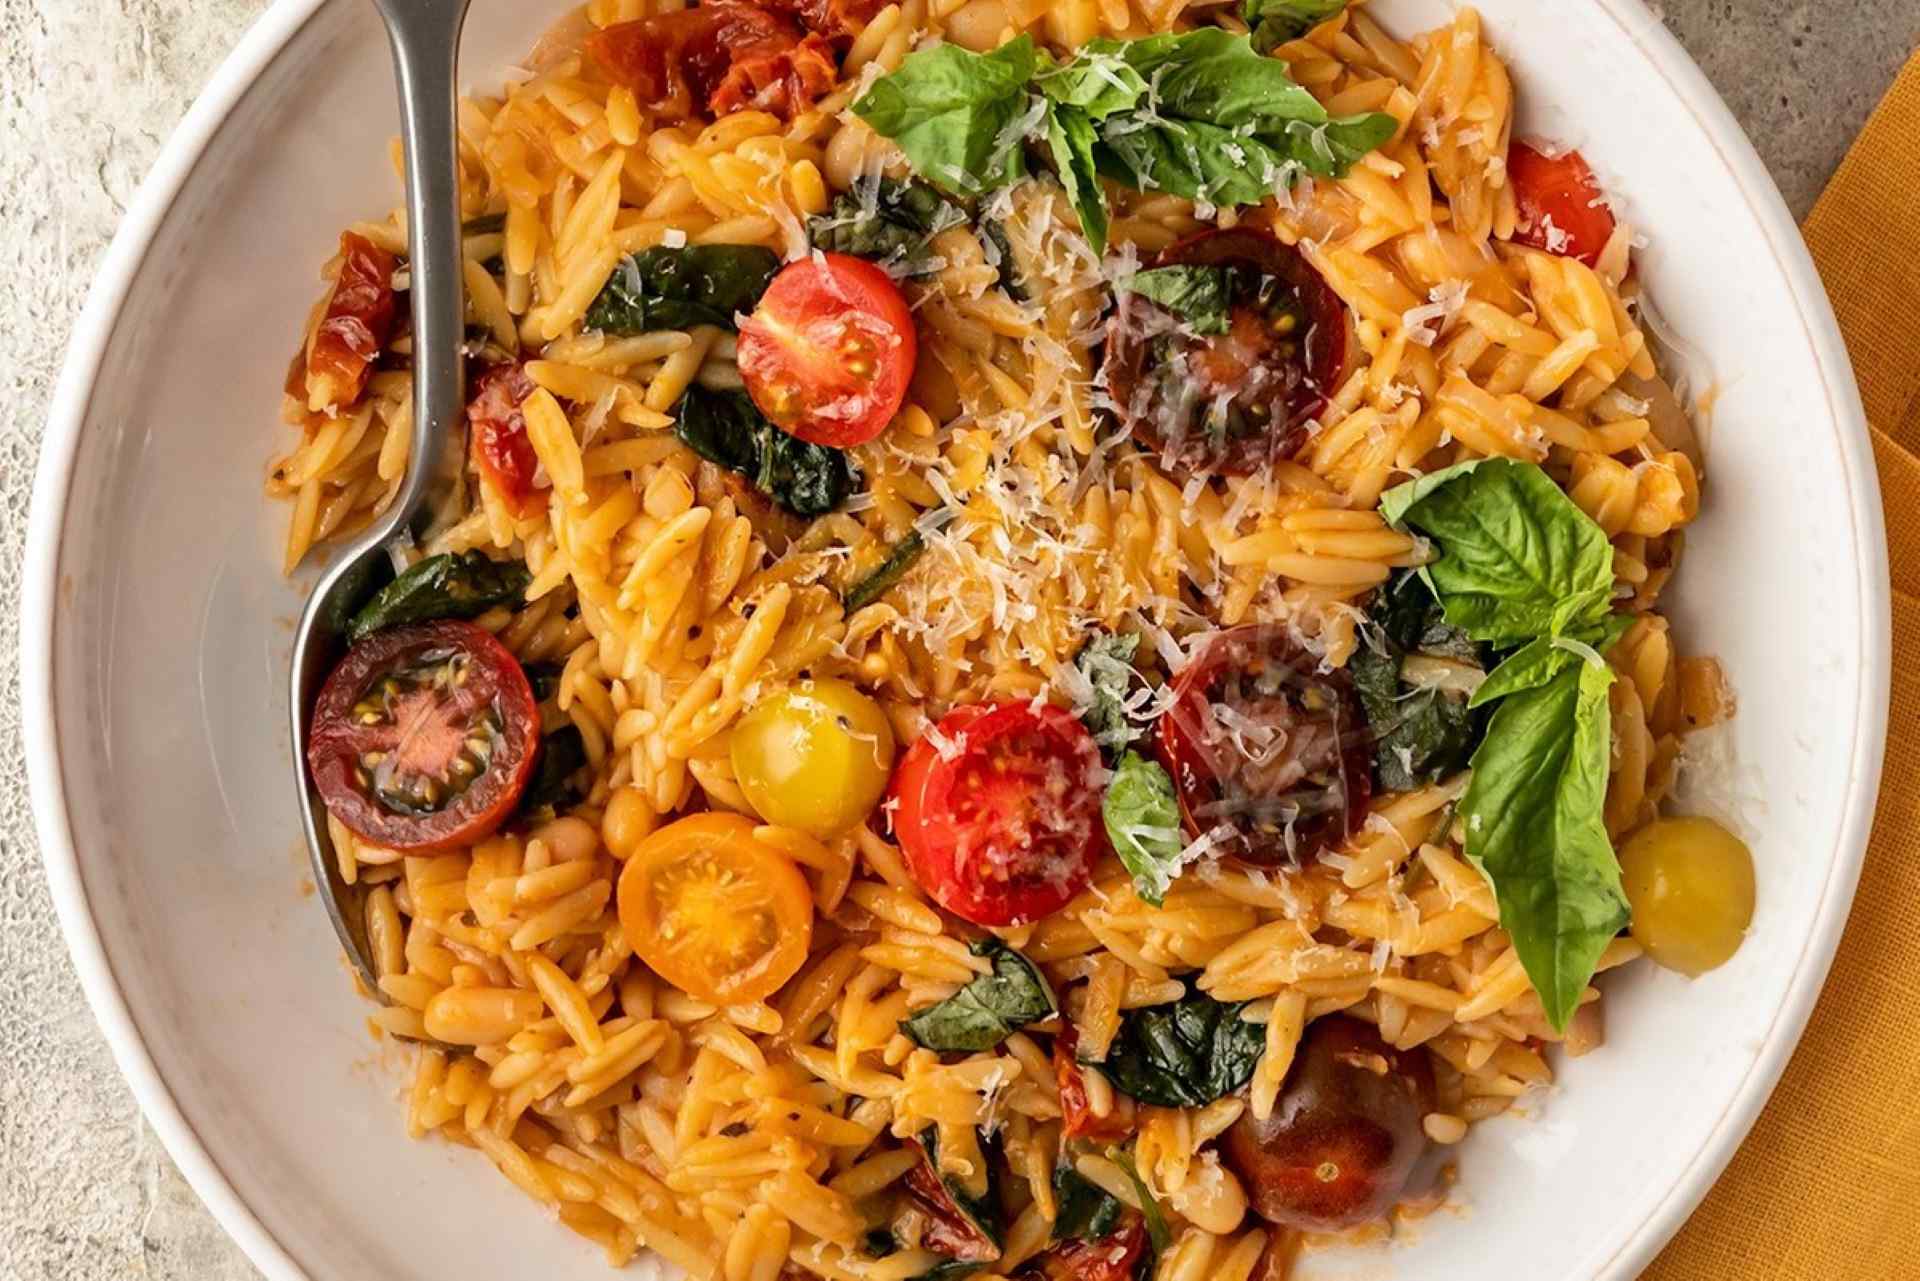 Grains, Pasta & Legumes: 17 Recipes To Add To Your Weekly Rotation